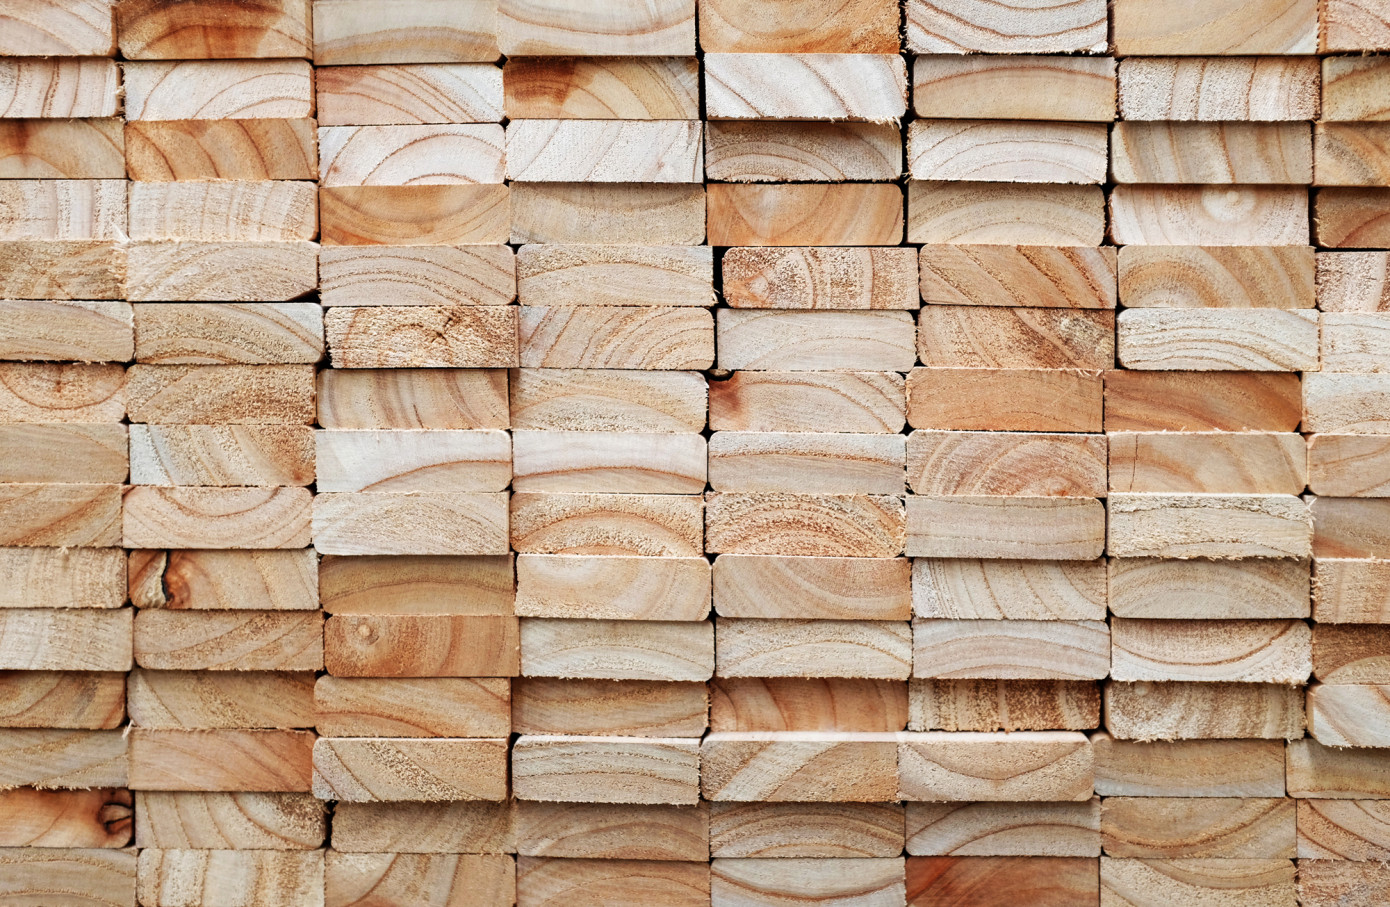 In March, price for lumber exported from Canada increases 4%